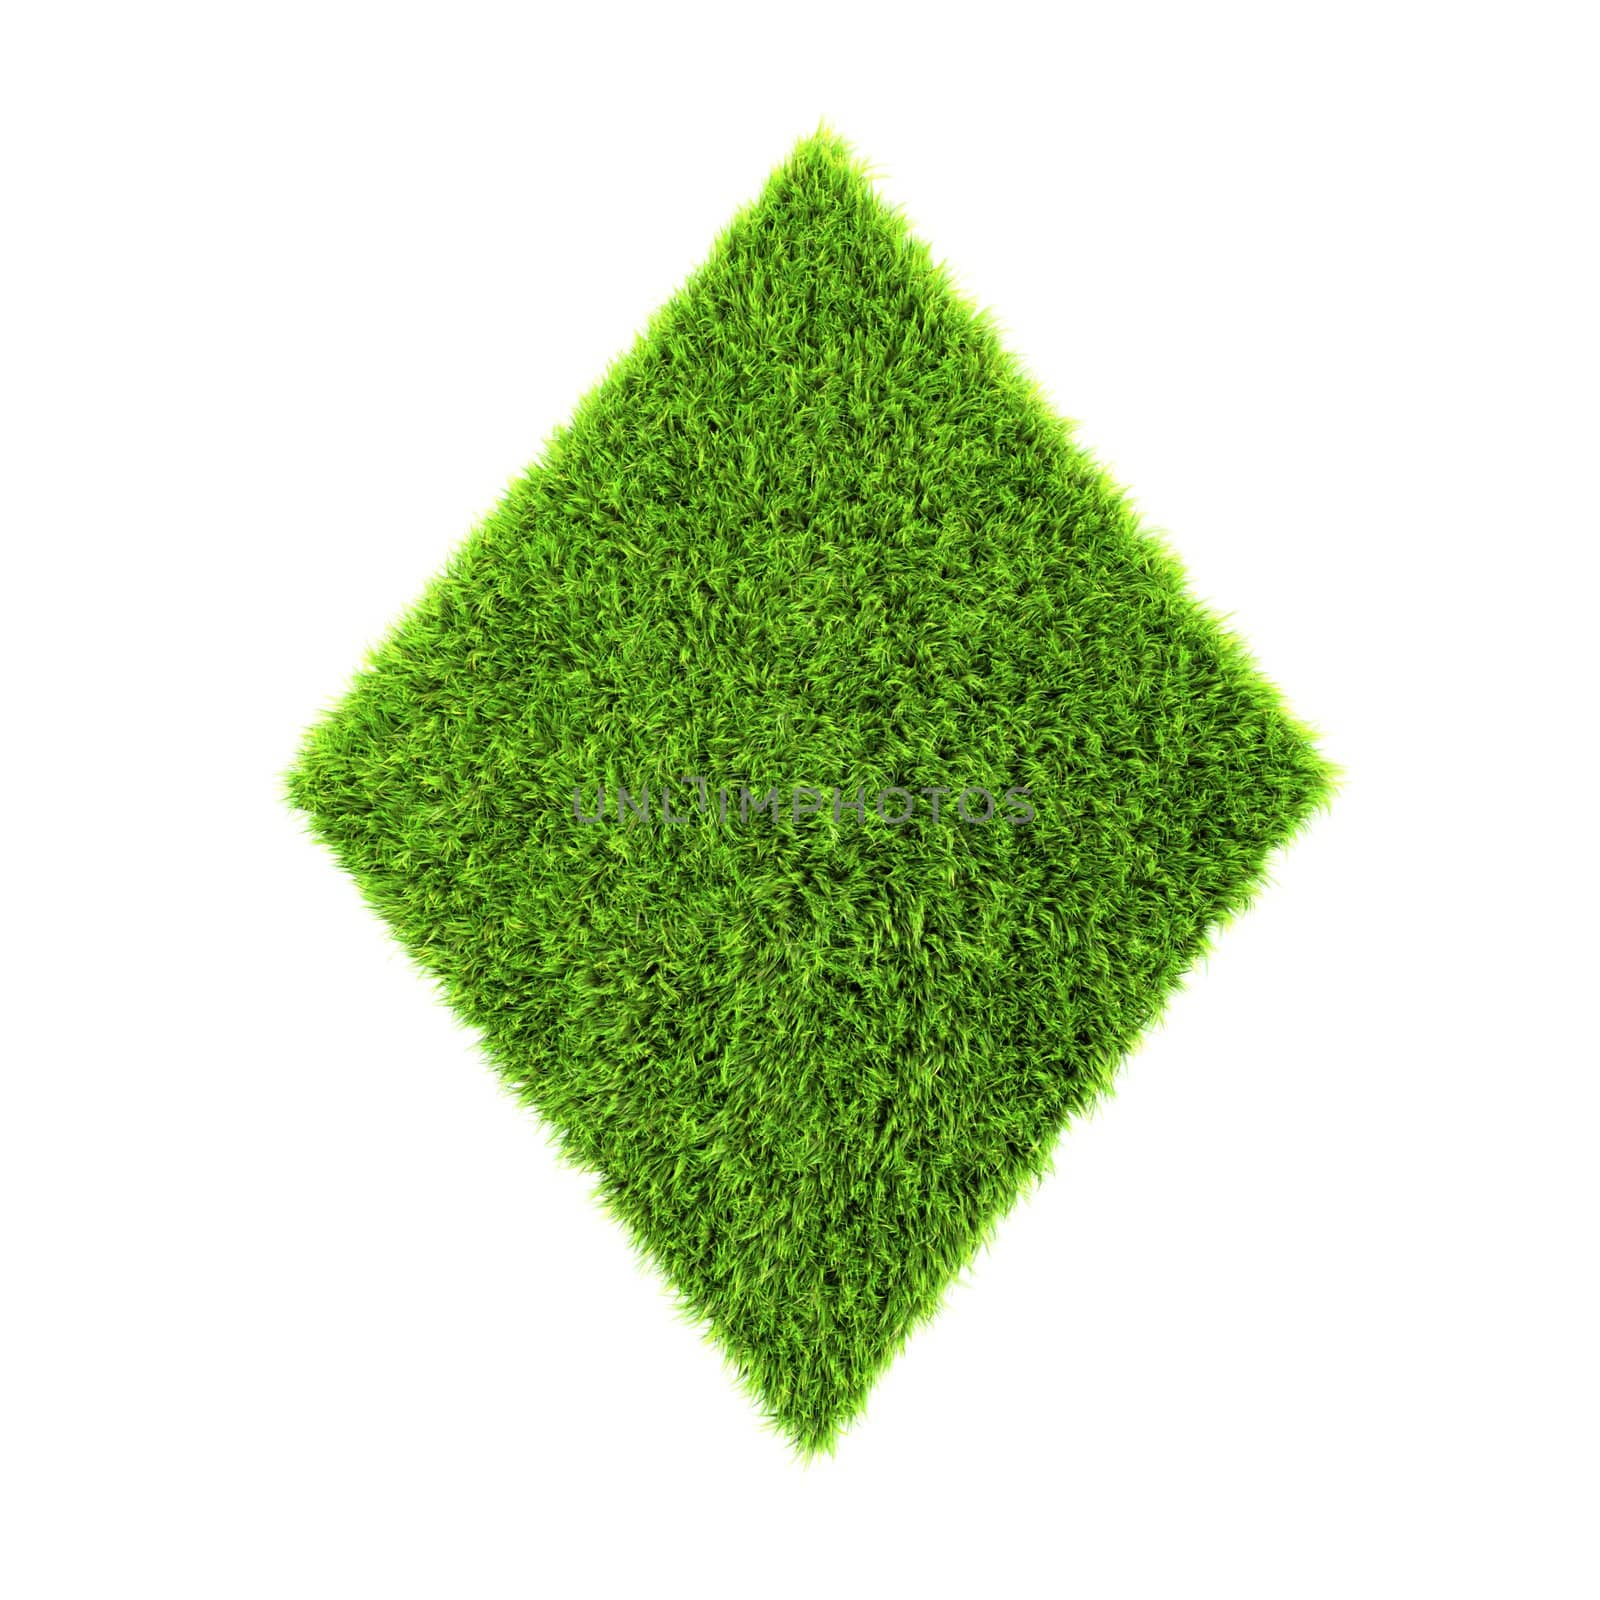 3d grass diamond isolated on a white background by chrisroll